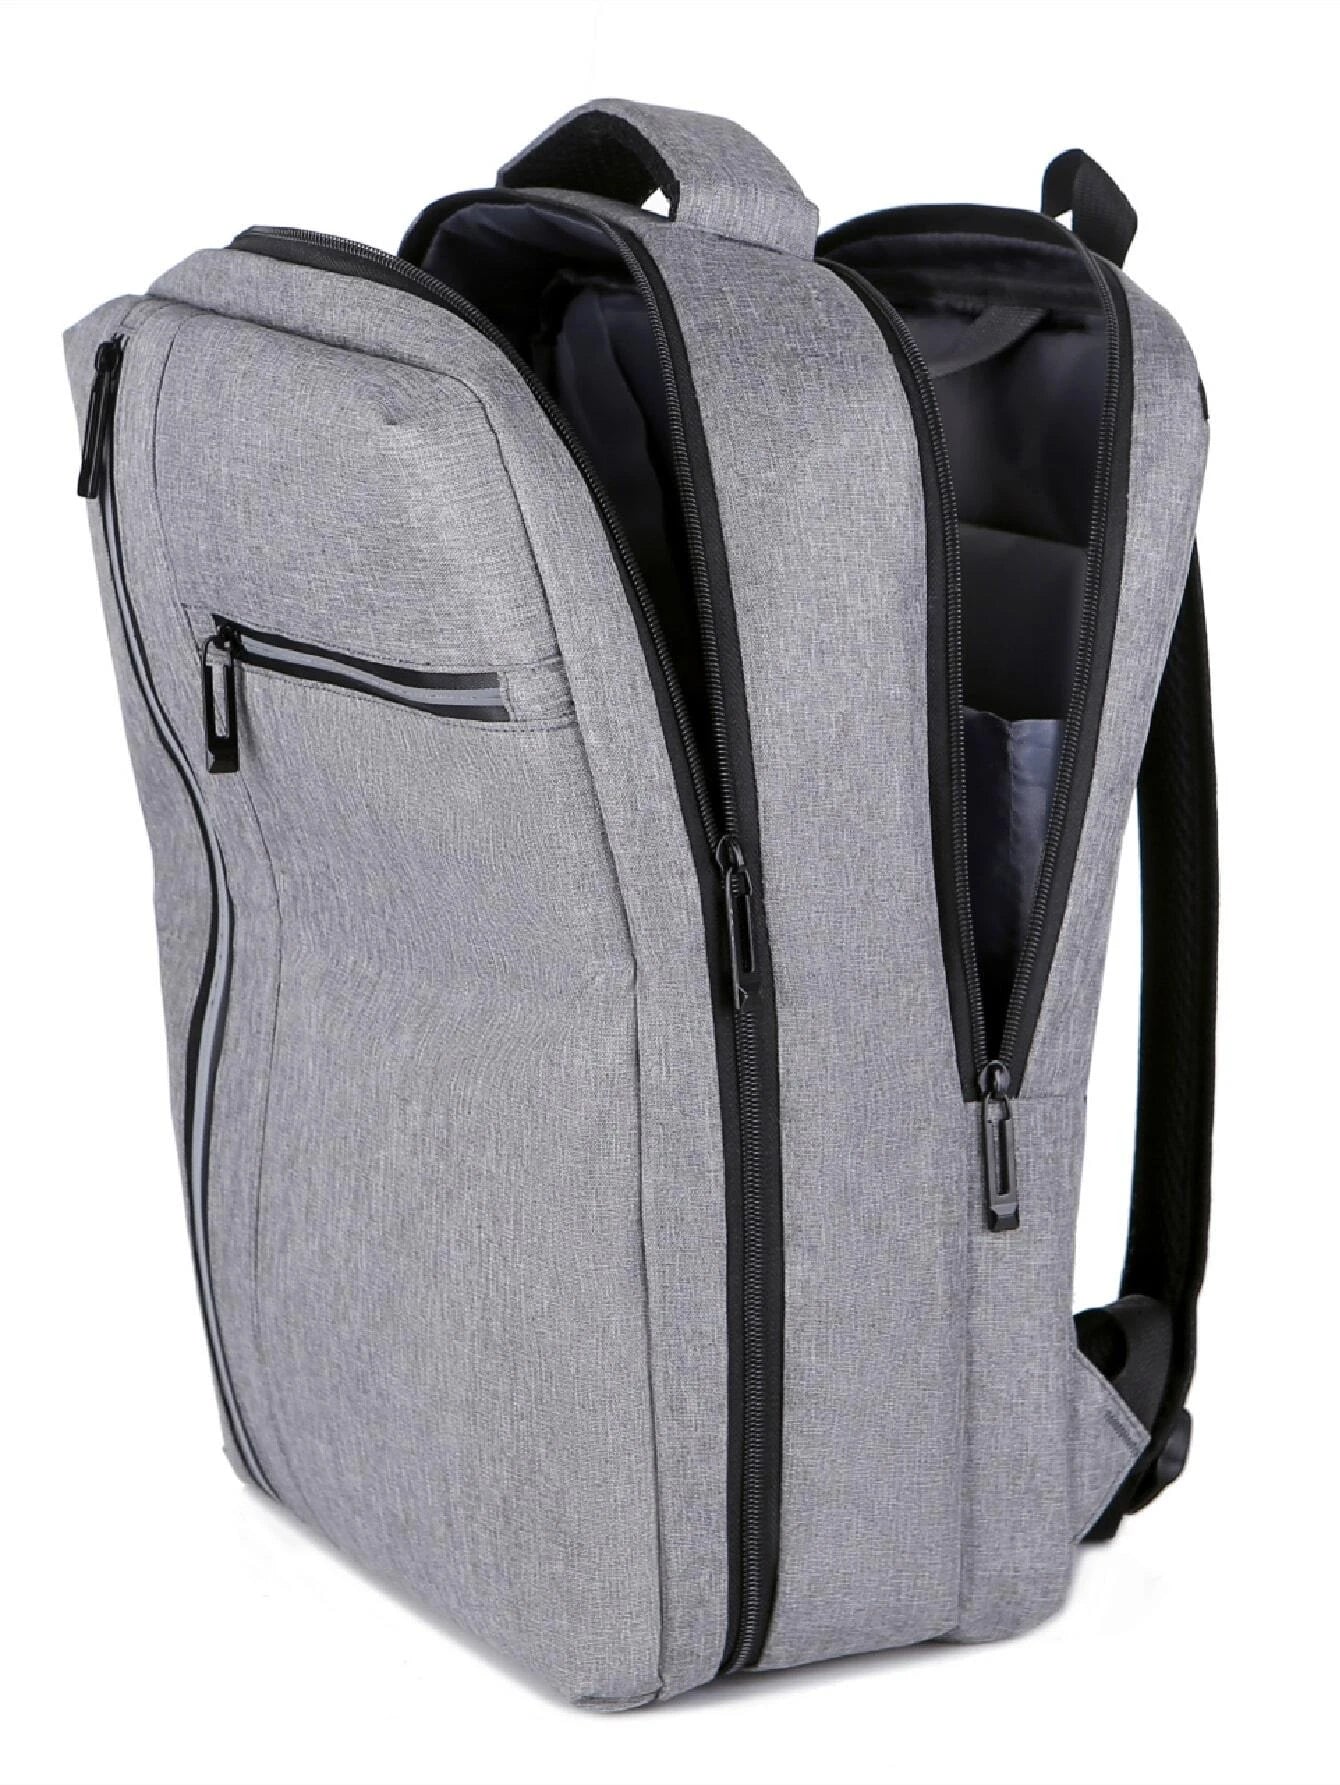 Medium Laptop Backpack With USB Charging Port Minimalist Functional High-Capacity For Business College School